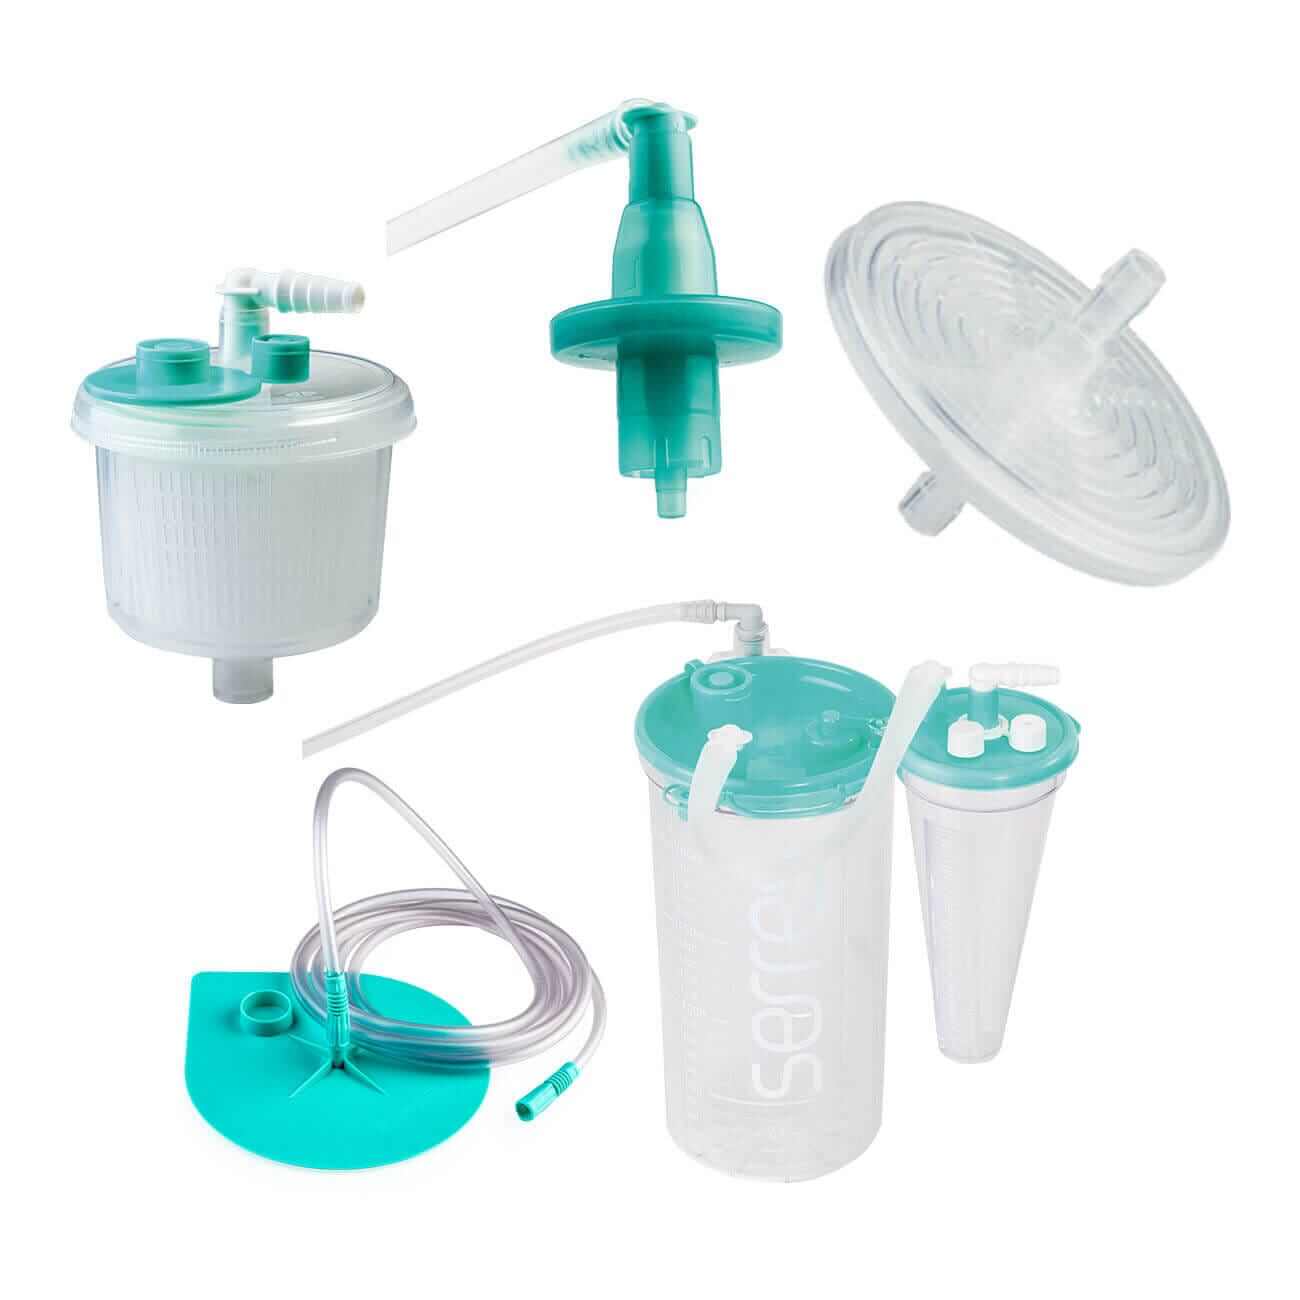 Accessories for Serres Suction System